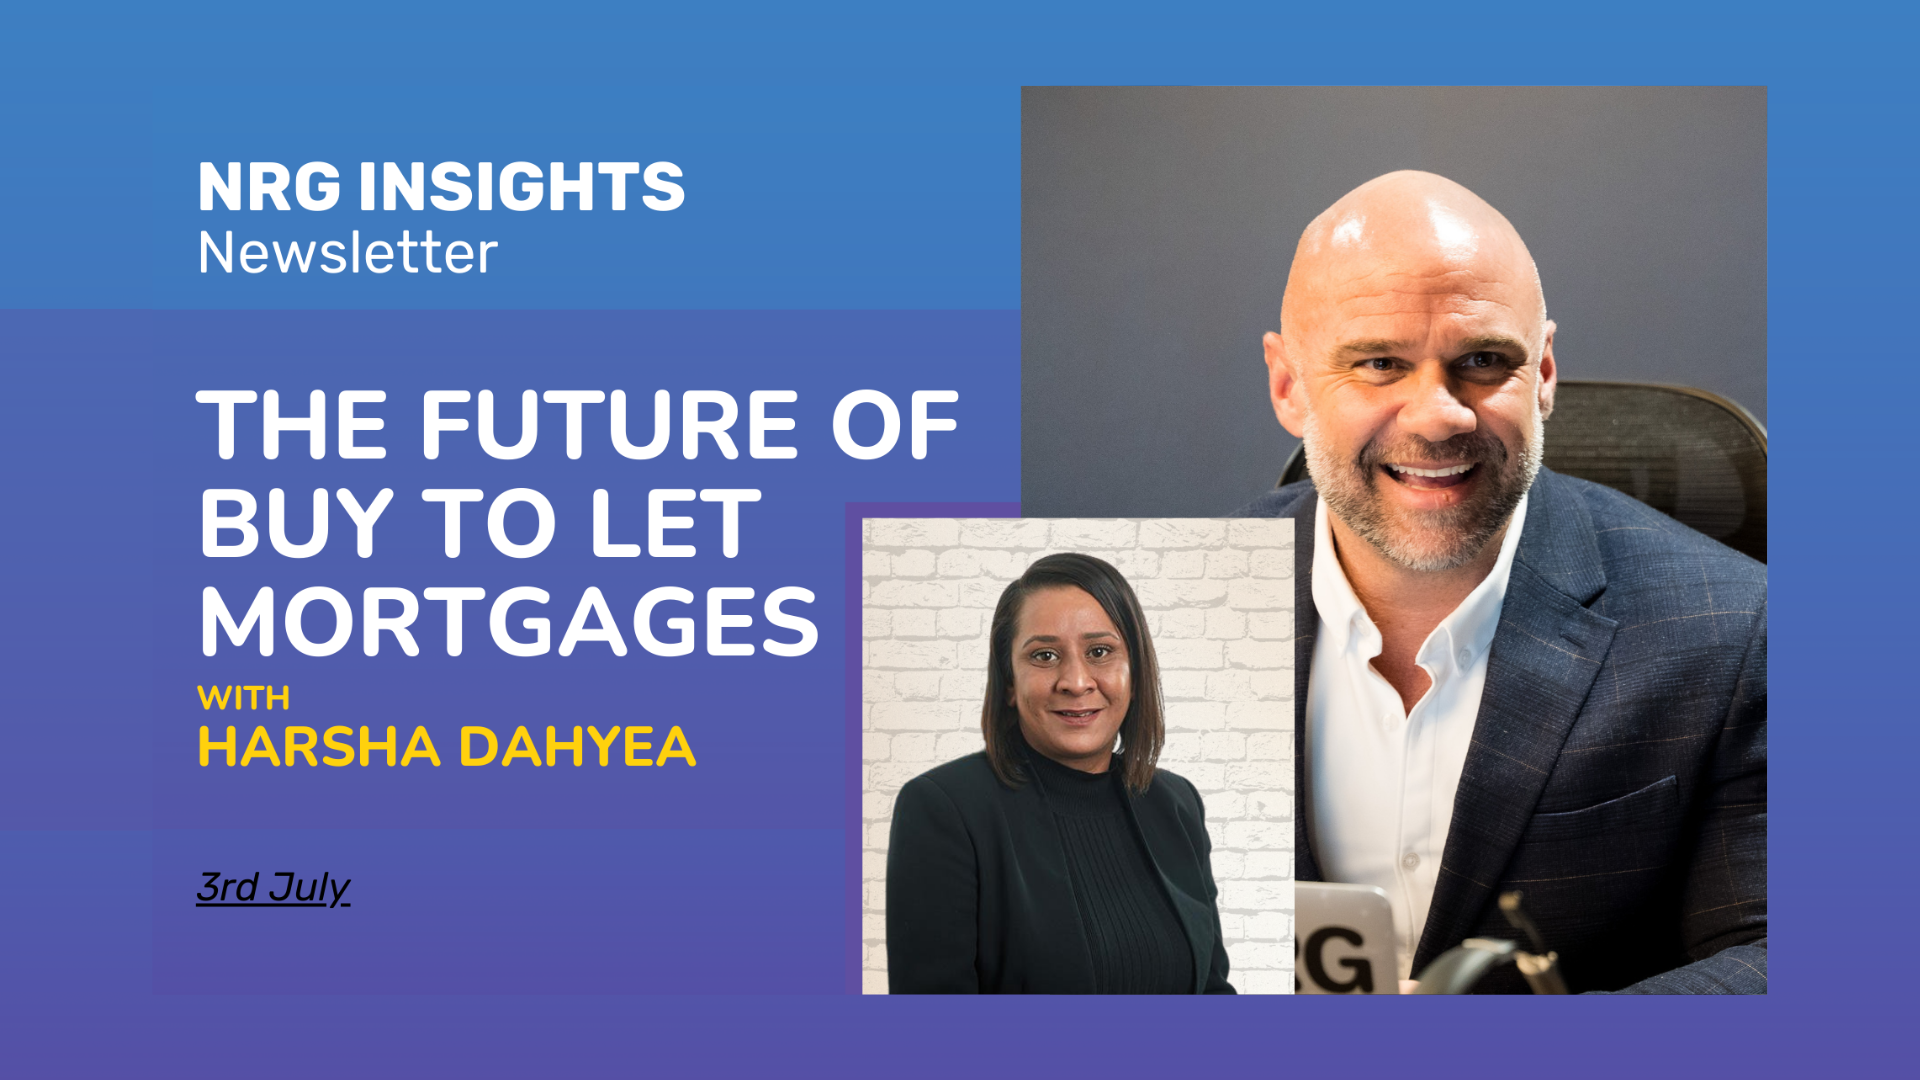 The Future of Buy To Let Mortgages with Harsha Dahyea